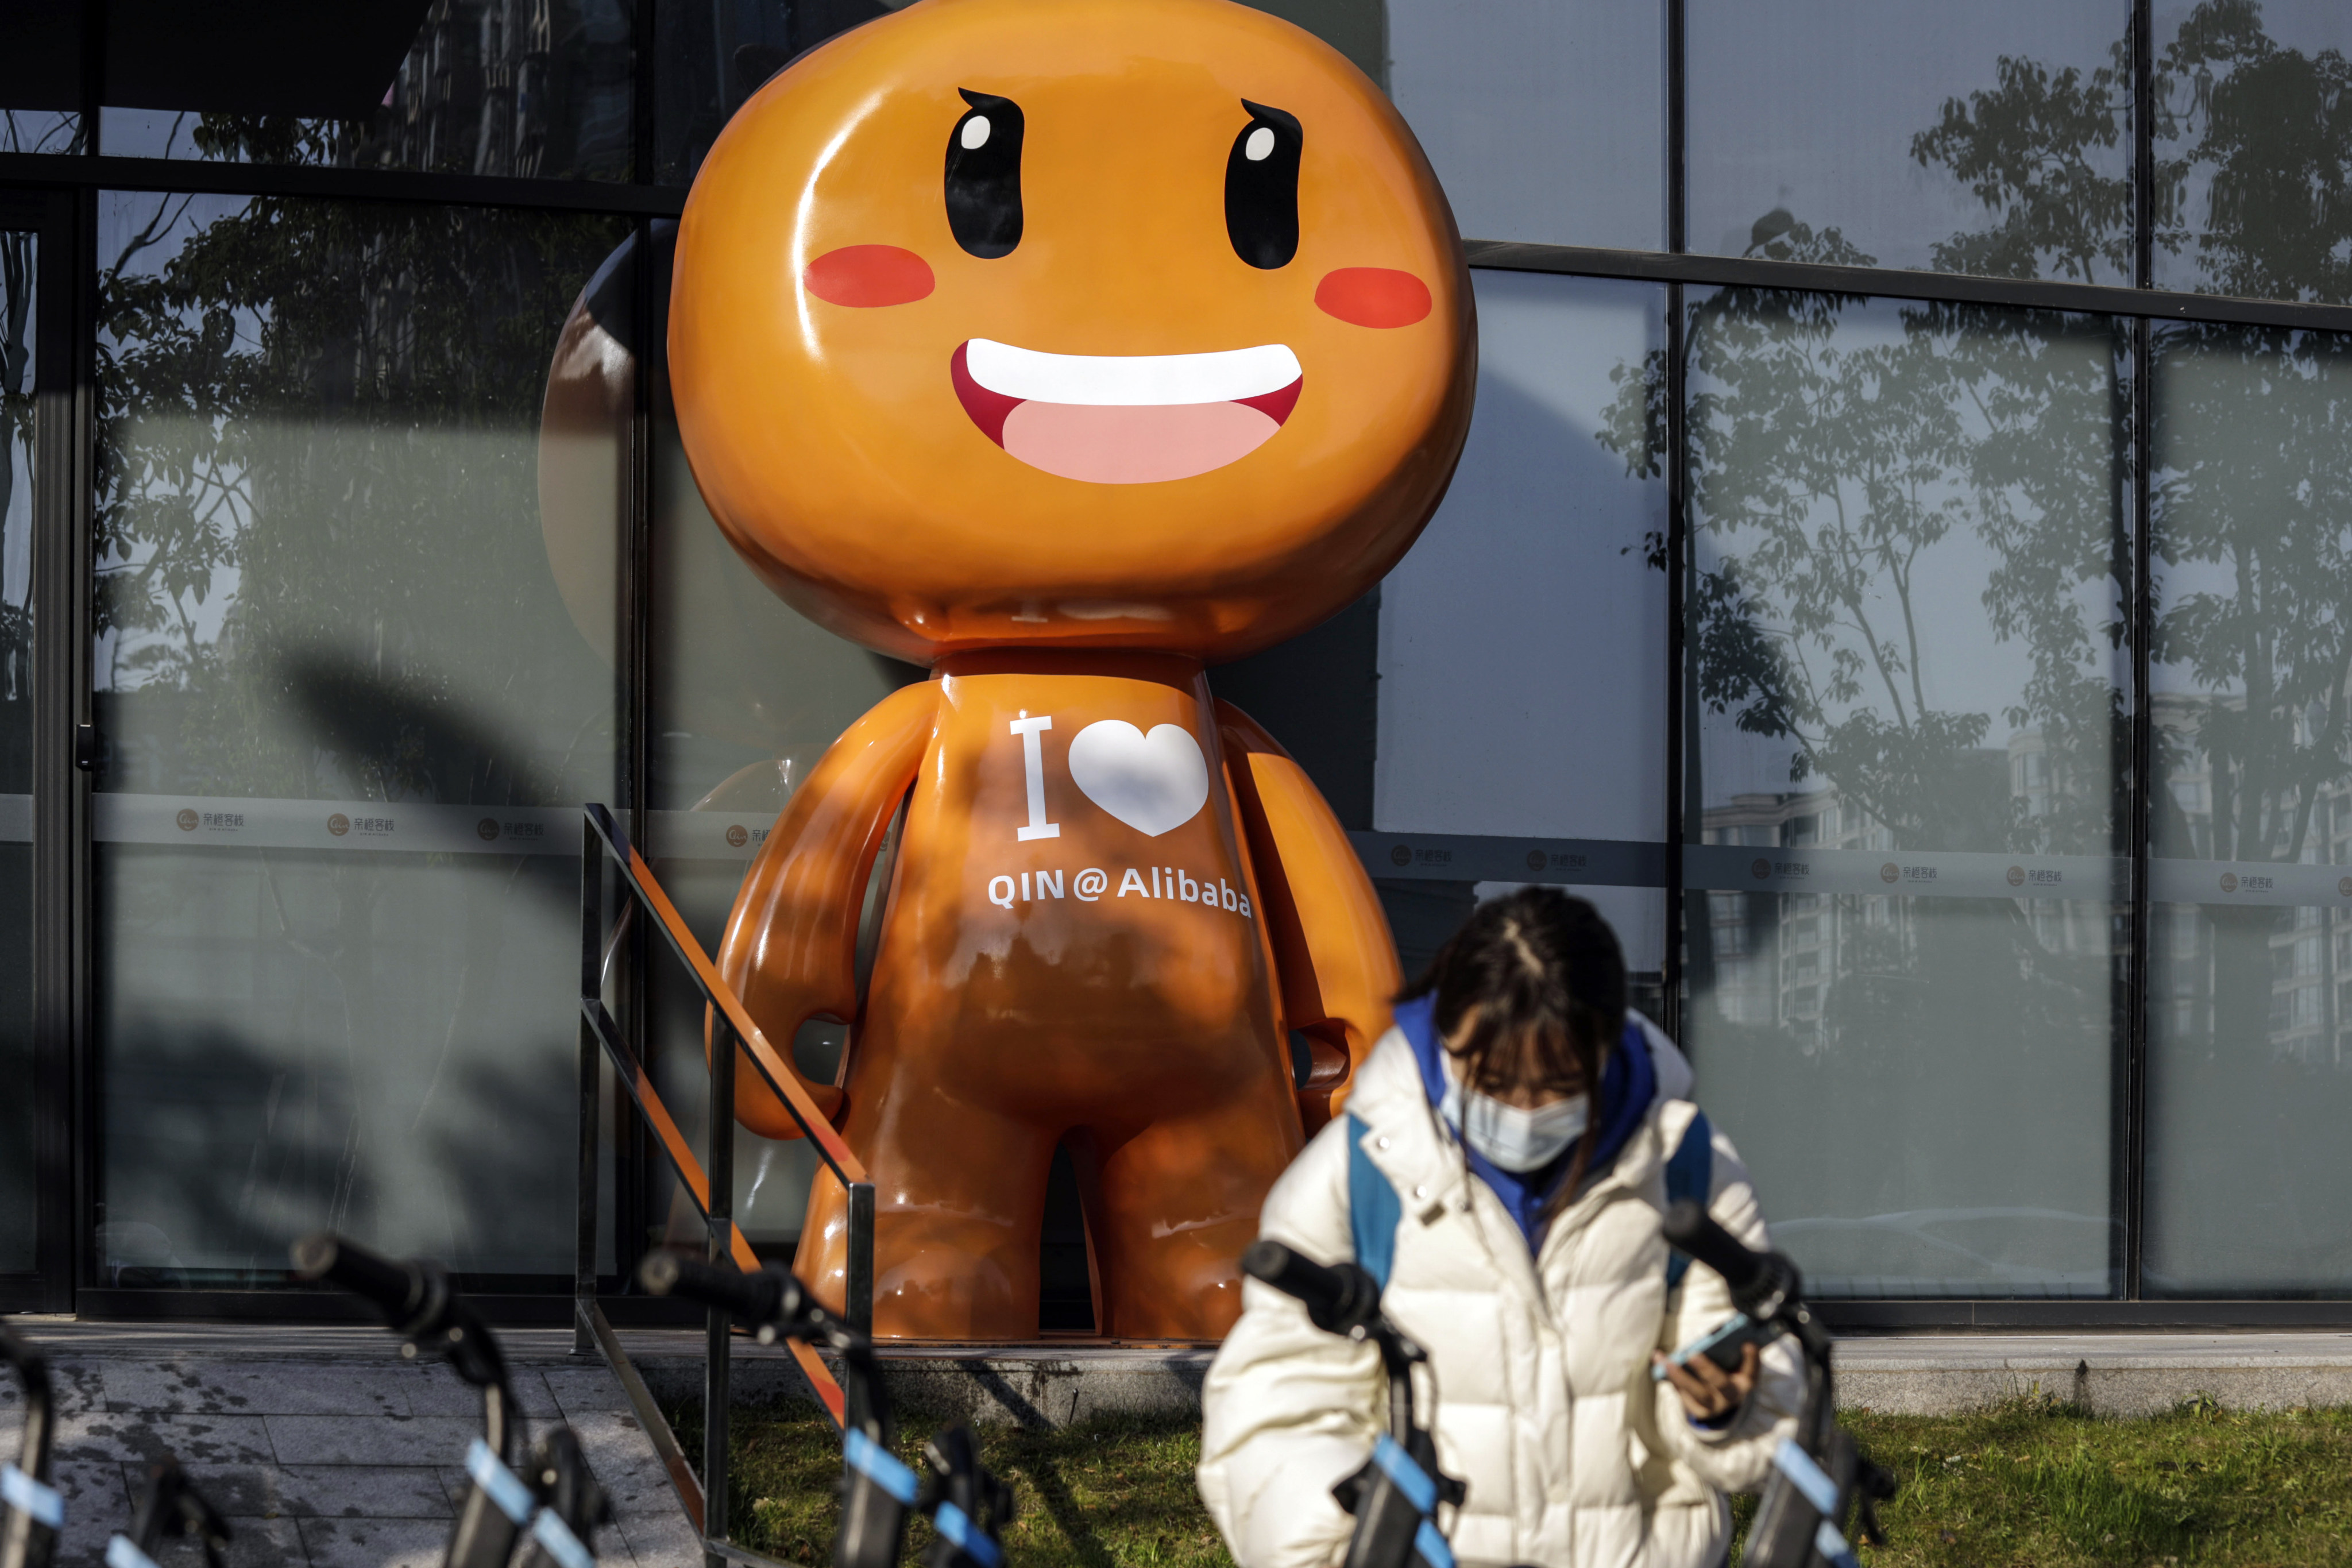 The mascot for Alibaba Group Holding's Taobao e-commerce platform is seen at the company’s headquarters in Hangzhou on February 21, 2022. Photo: Bloomberg